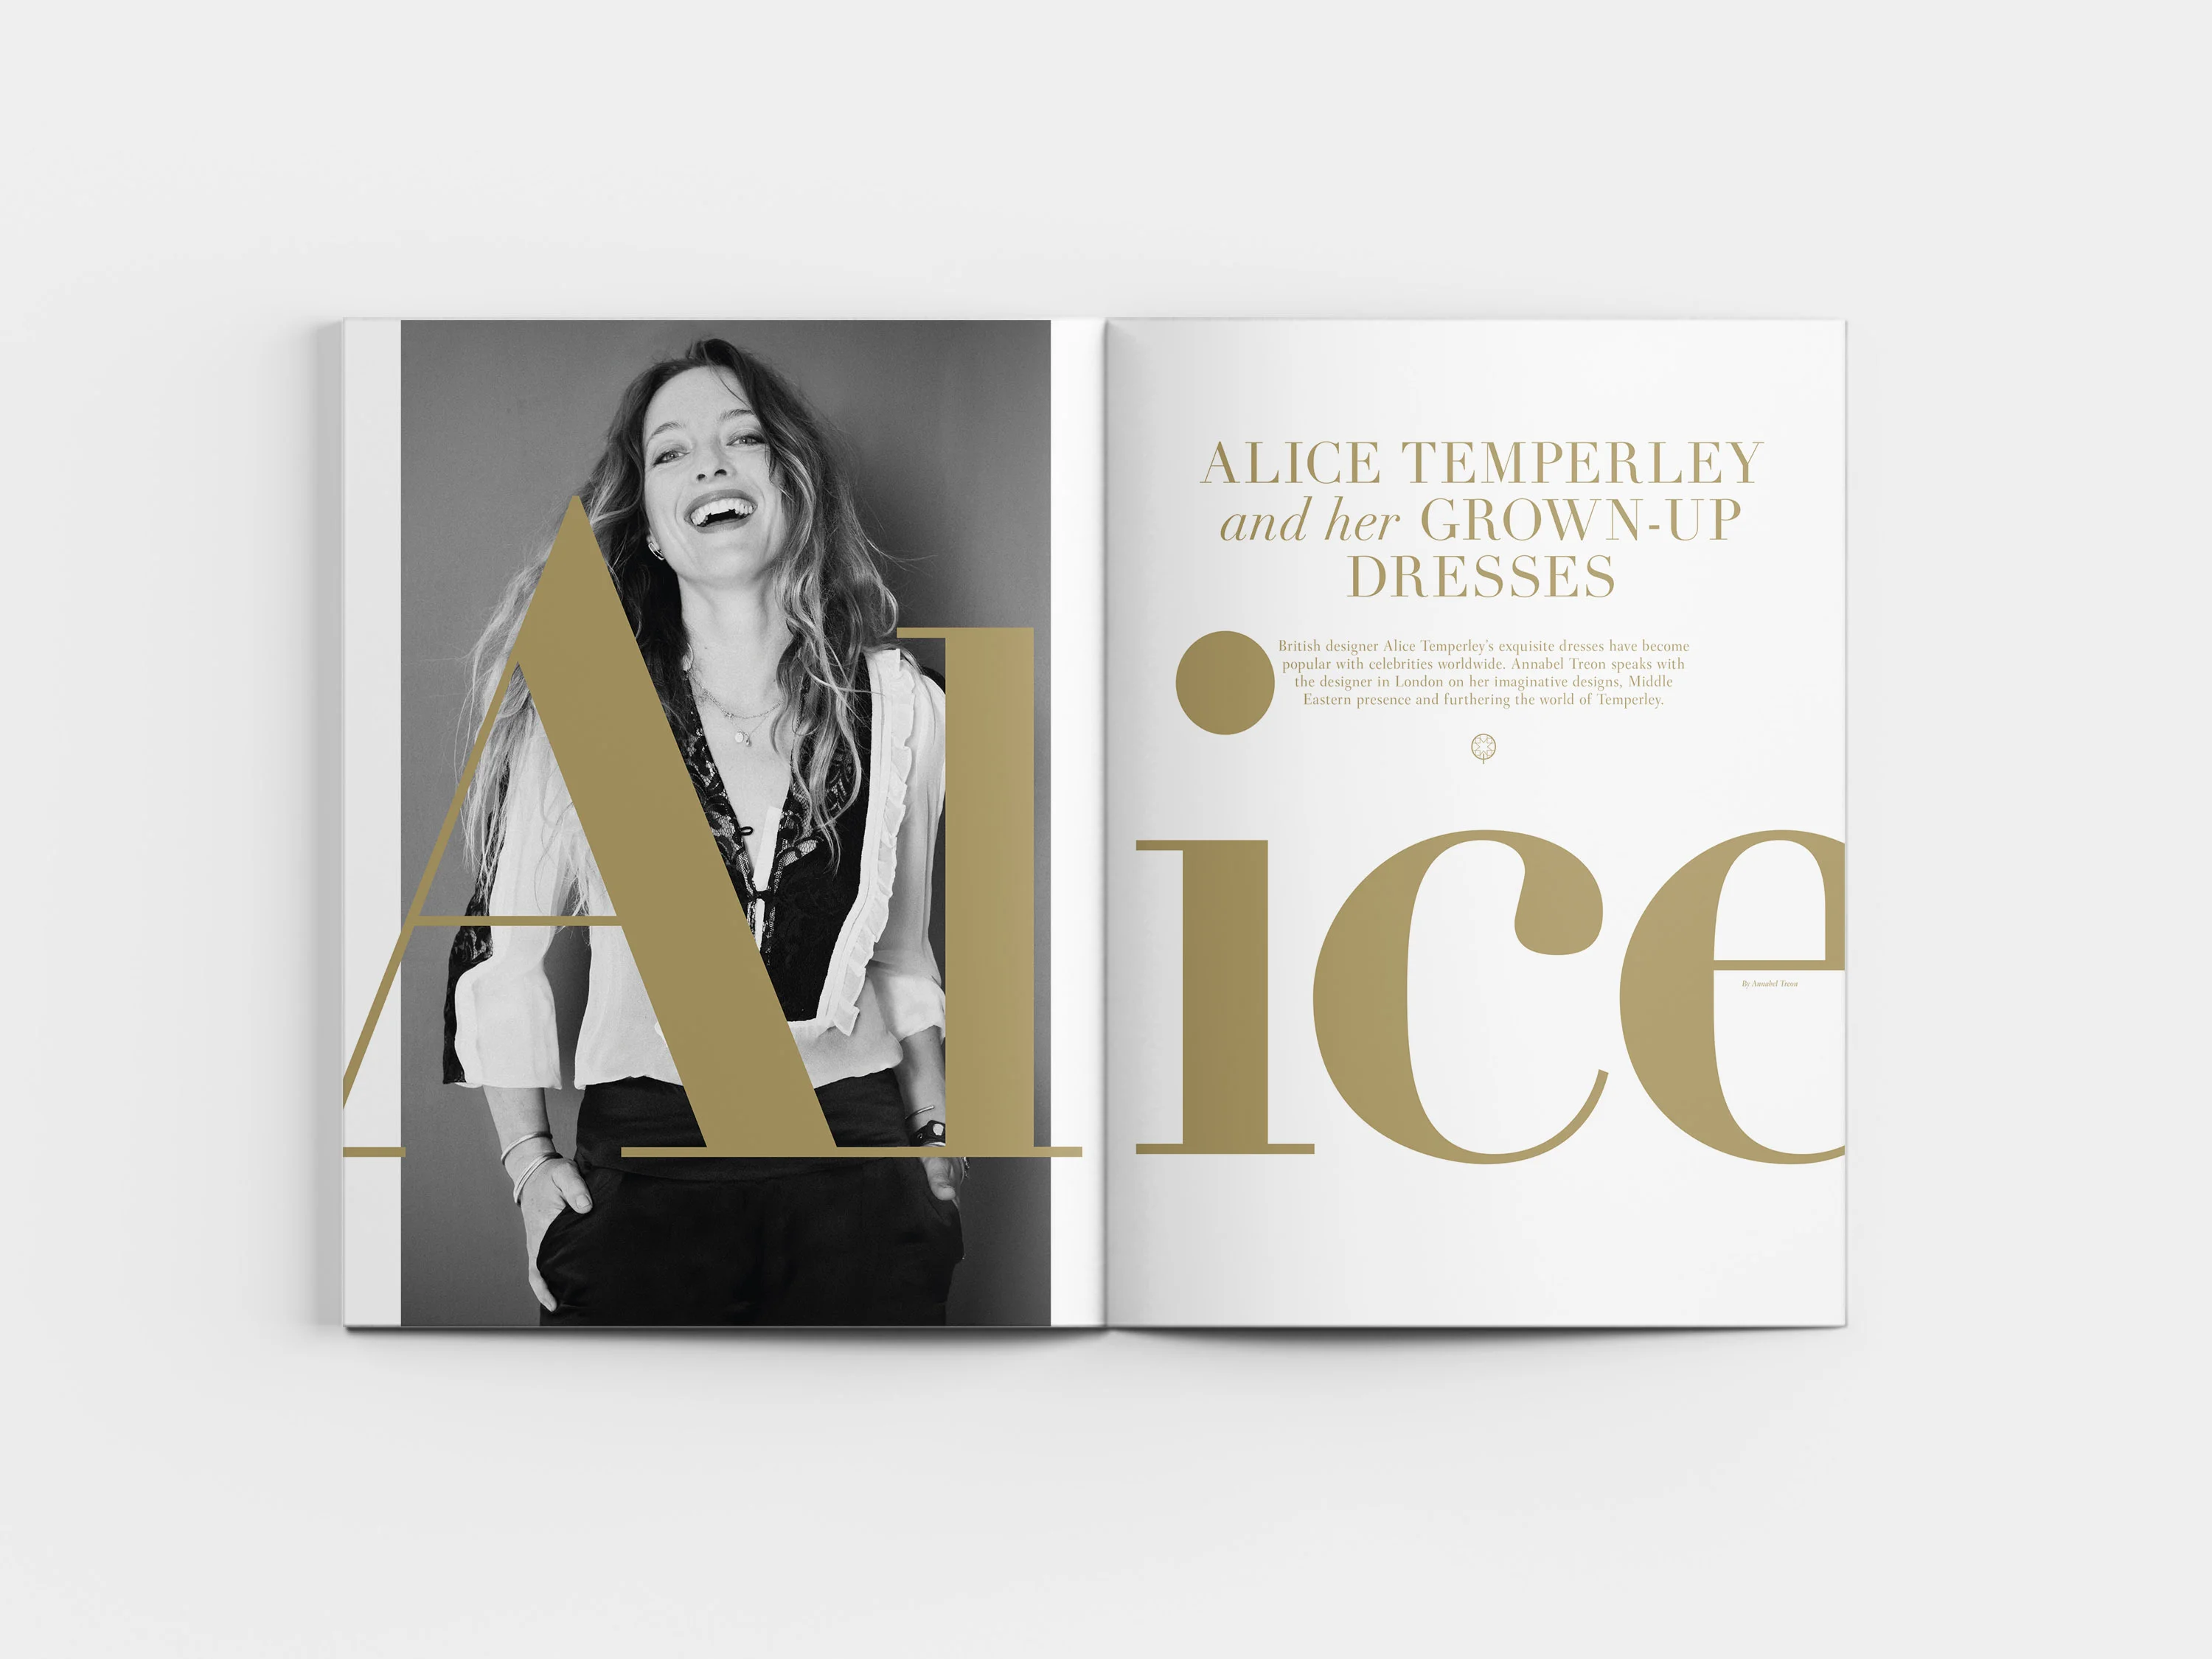 a spread from Masquerade Magazine about the designer Alice Temperley